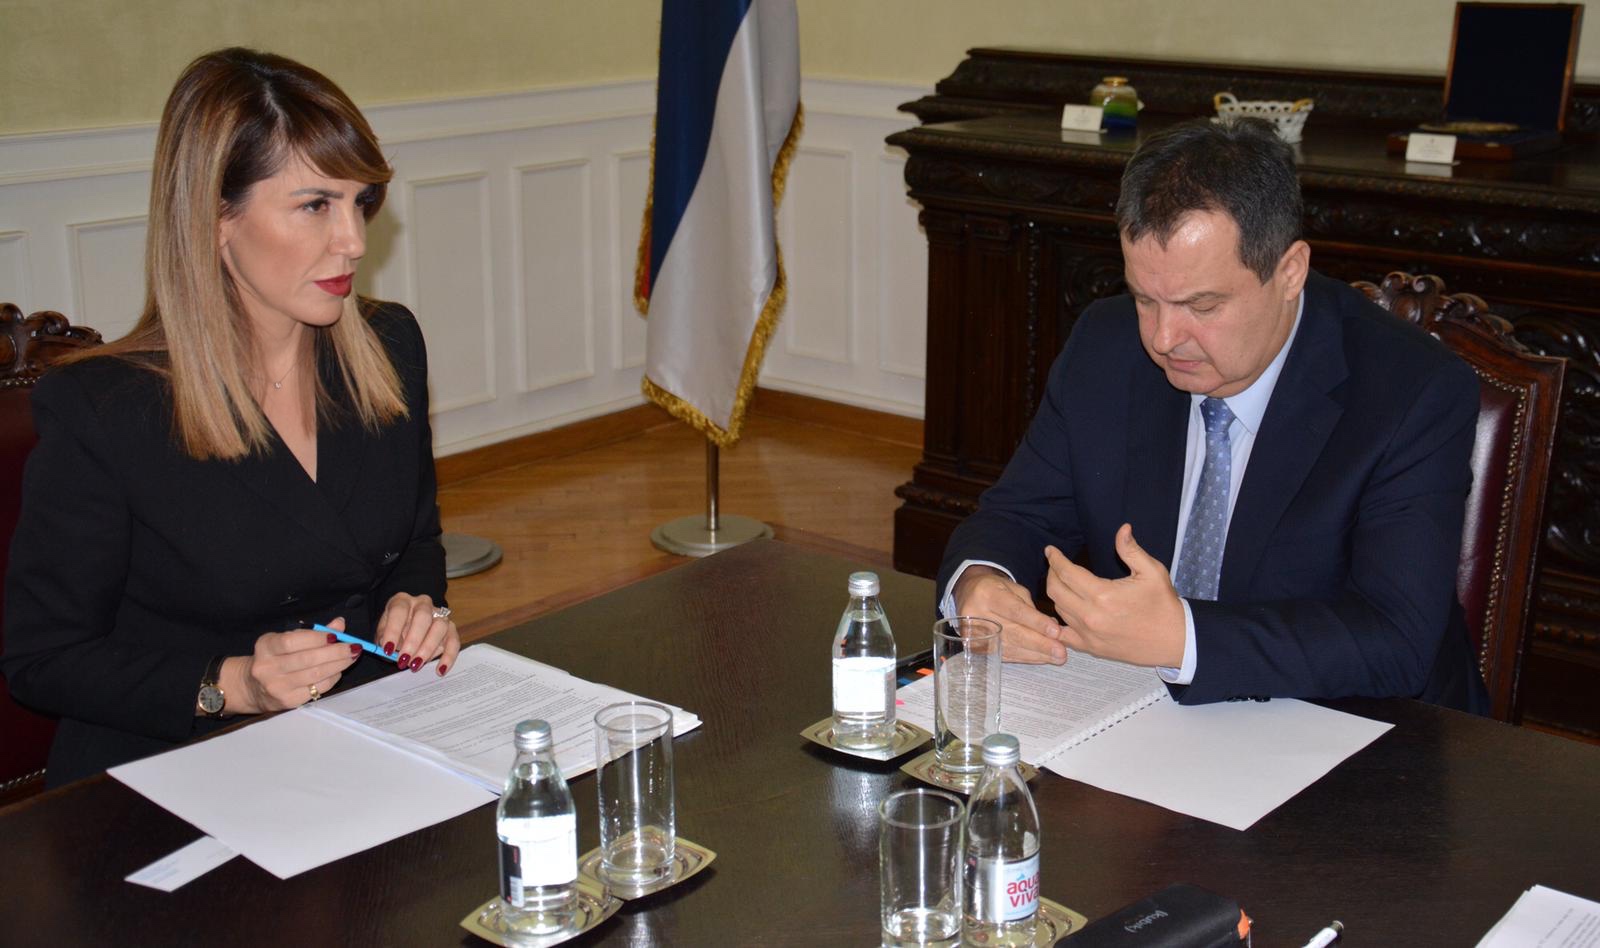 In a two-day visit to Serbia, Secretary General of the Regional Cooperation Council (RCC) Majlinda Bregu met with the Prime Minister of Serbia, Ana Brnabić and First Deputy Prime Minister and Minister of Foreign Affairs, Ivica Dačić, , among other Serbian officials. (Photo:  Courtesy of the Government of the Republic of Serbia)